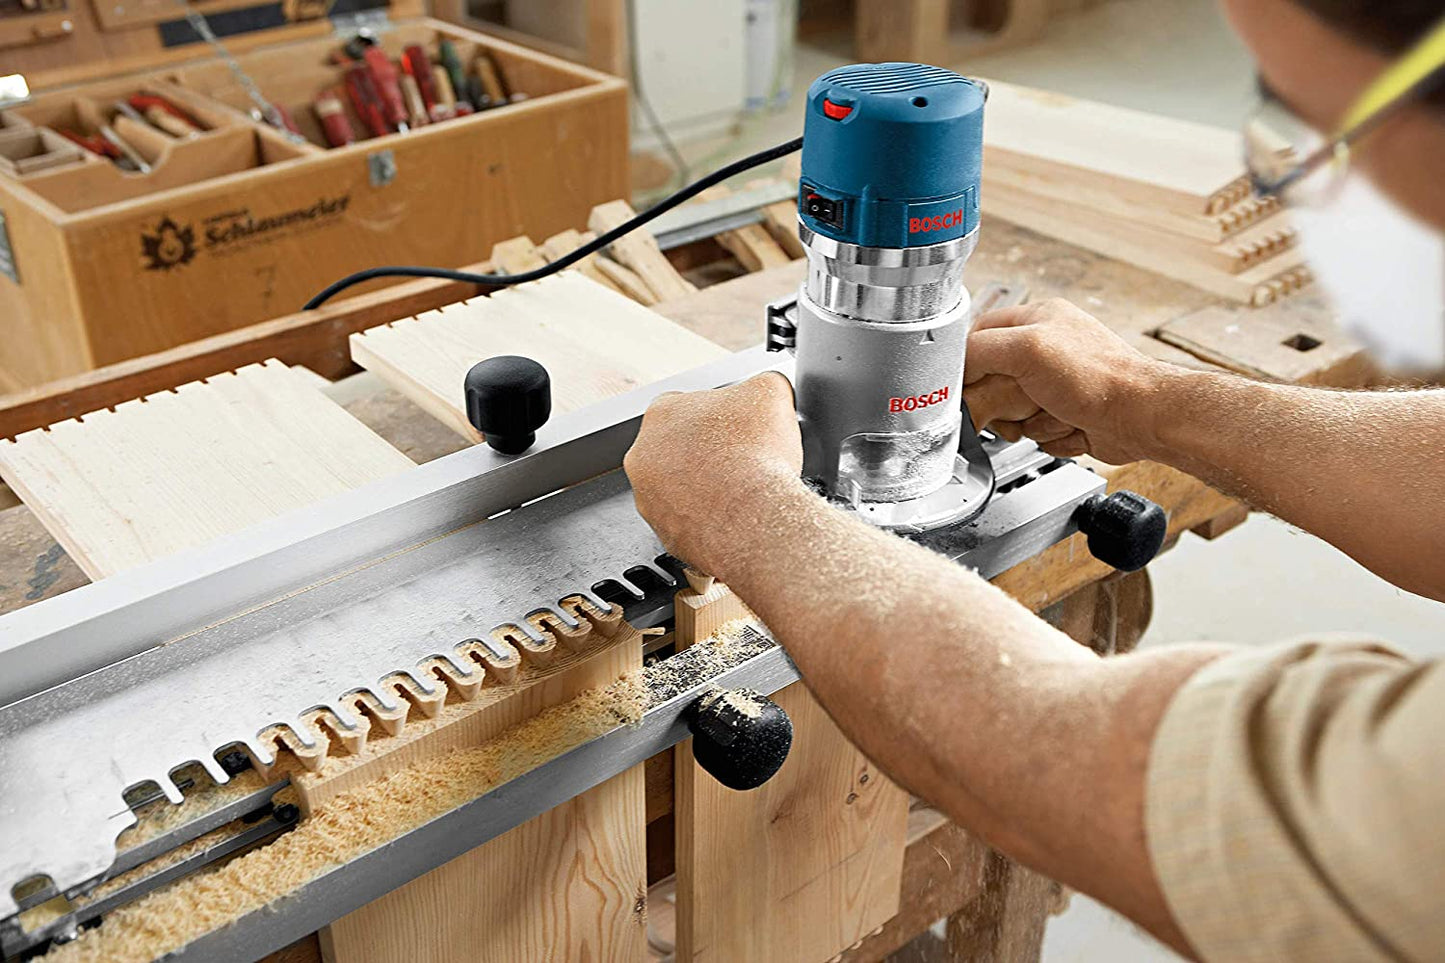 Bosch - 2.25 HP Combination Plunge- and Fixed-Base Router - Model: 1617EVSPK